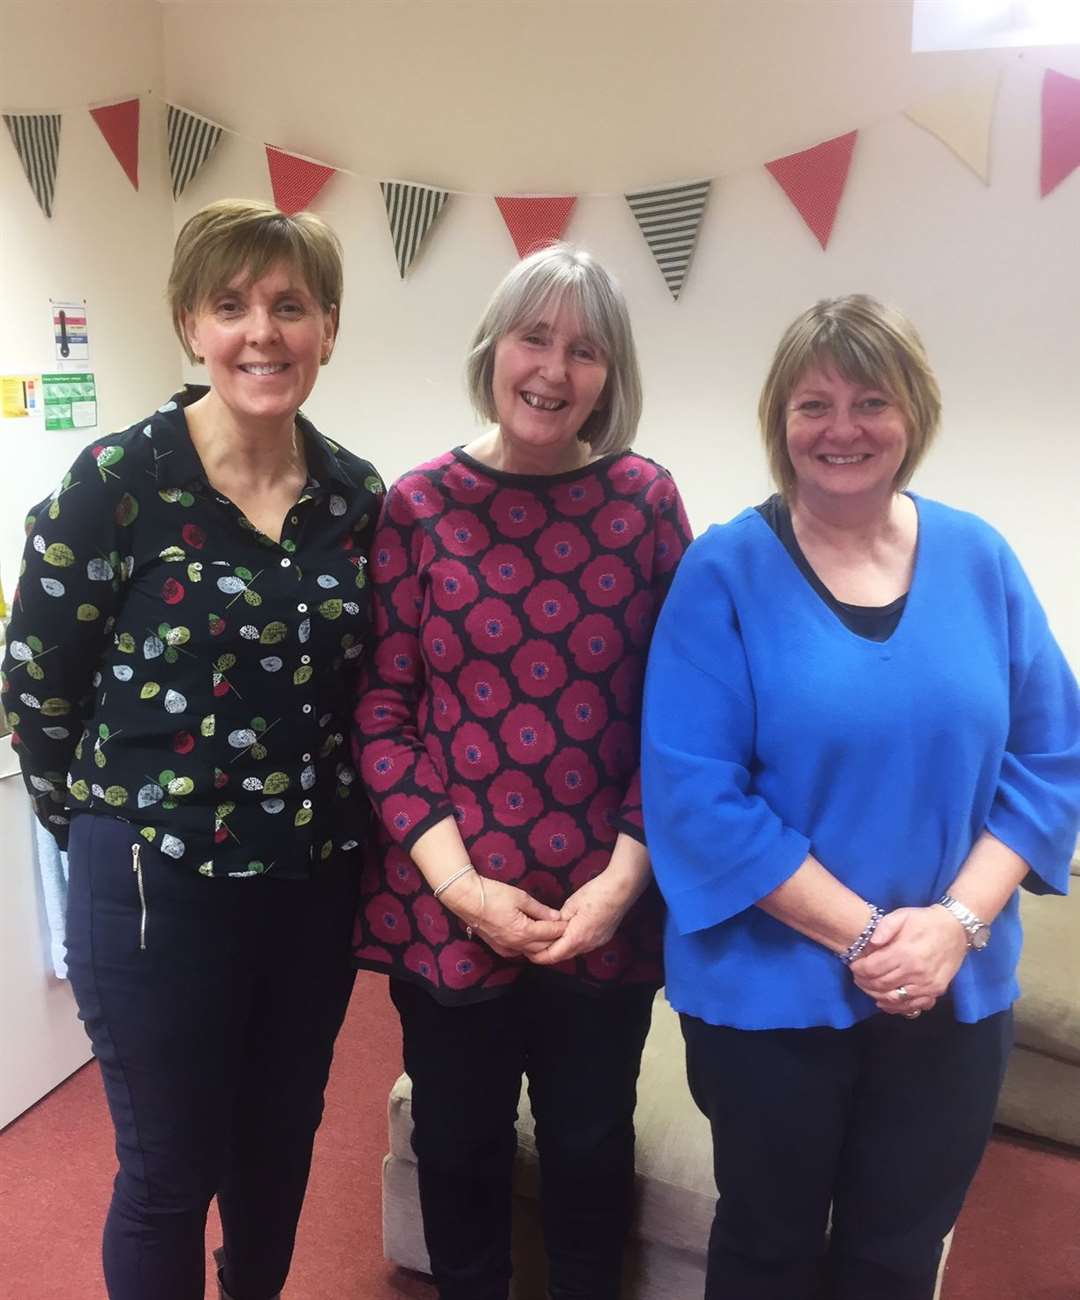 Befriending Caithness staff (from left) Elspeth Manson, coordinator, Angie House, senior coordinator, and Mary Bain, administrator.